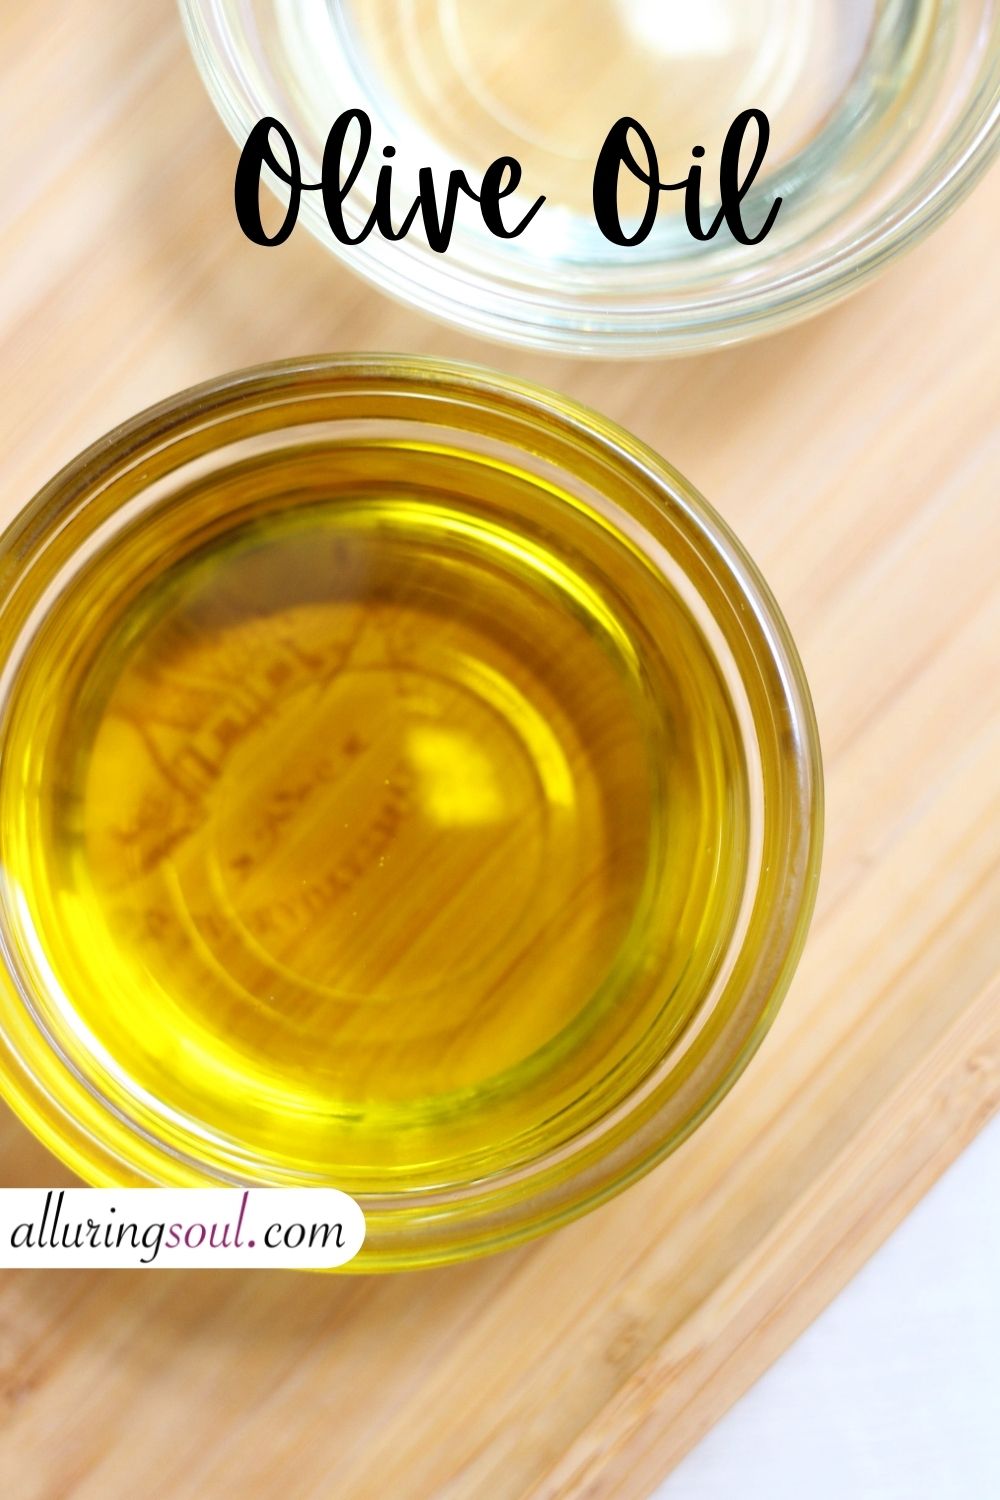 Argan Oil Vs Olive Oil And Which Is Best For Hair & Skin